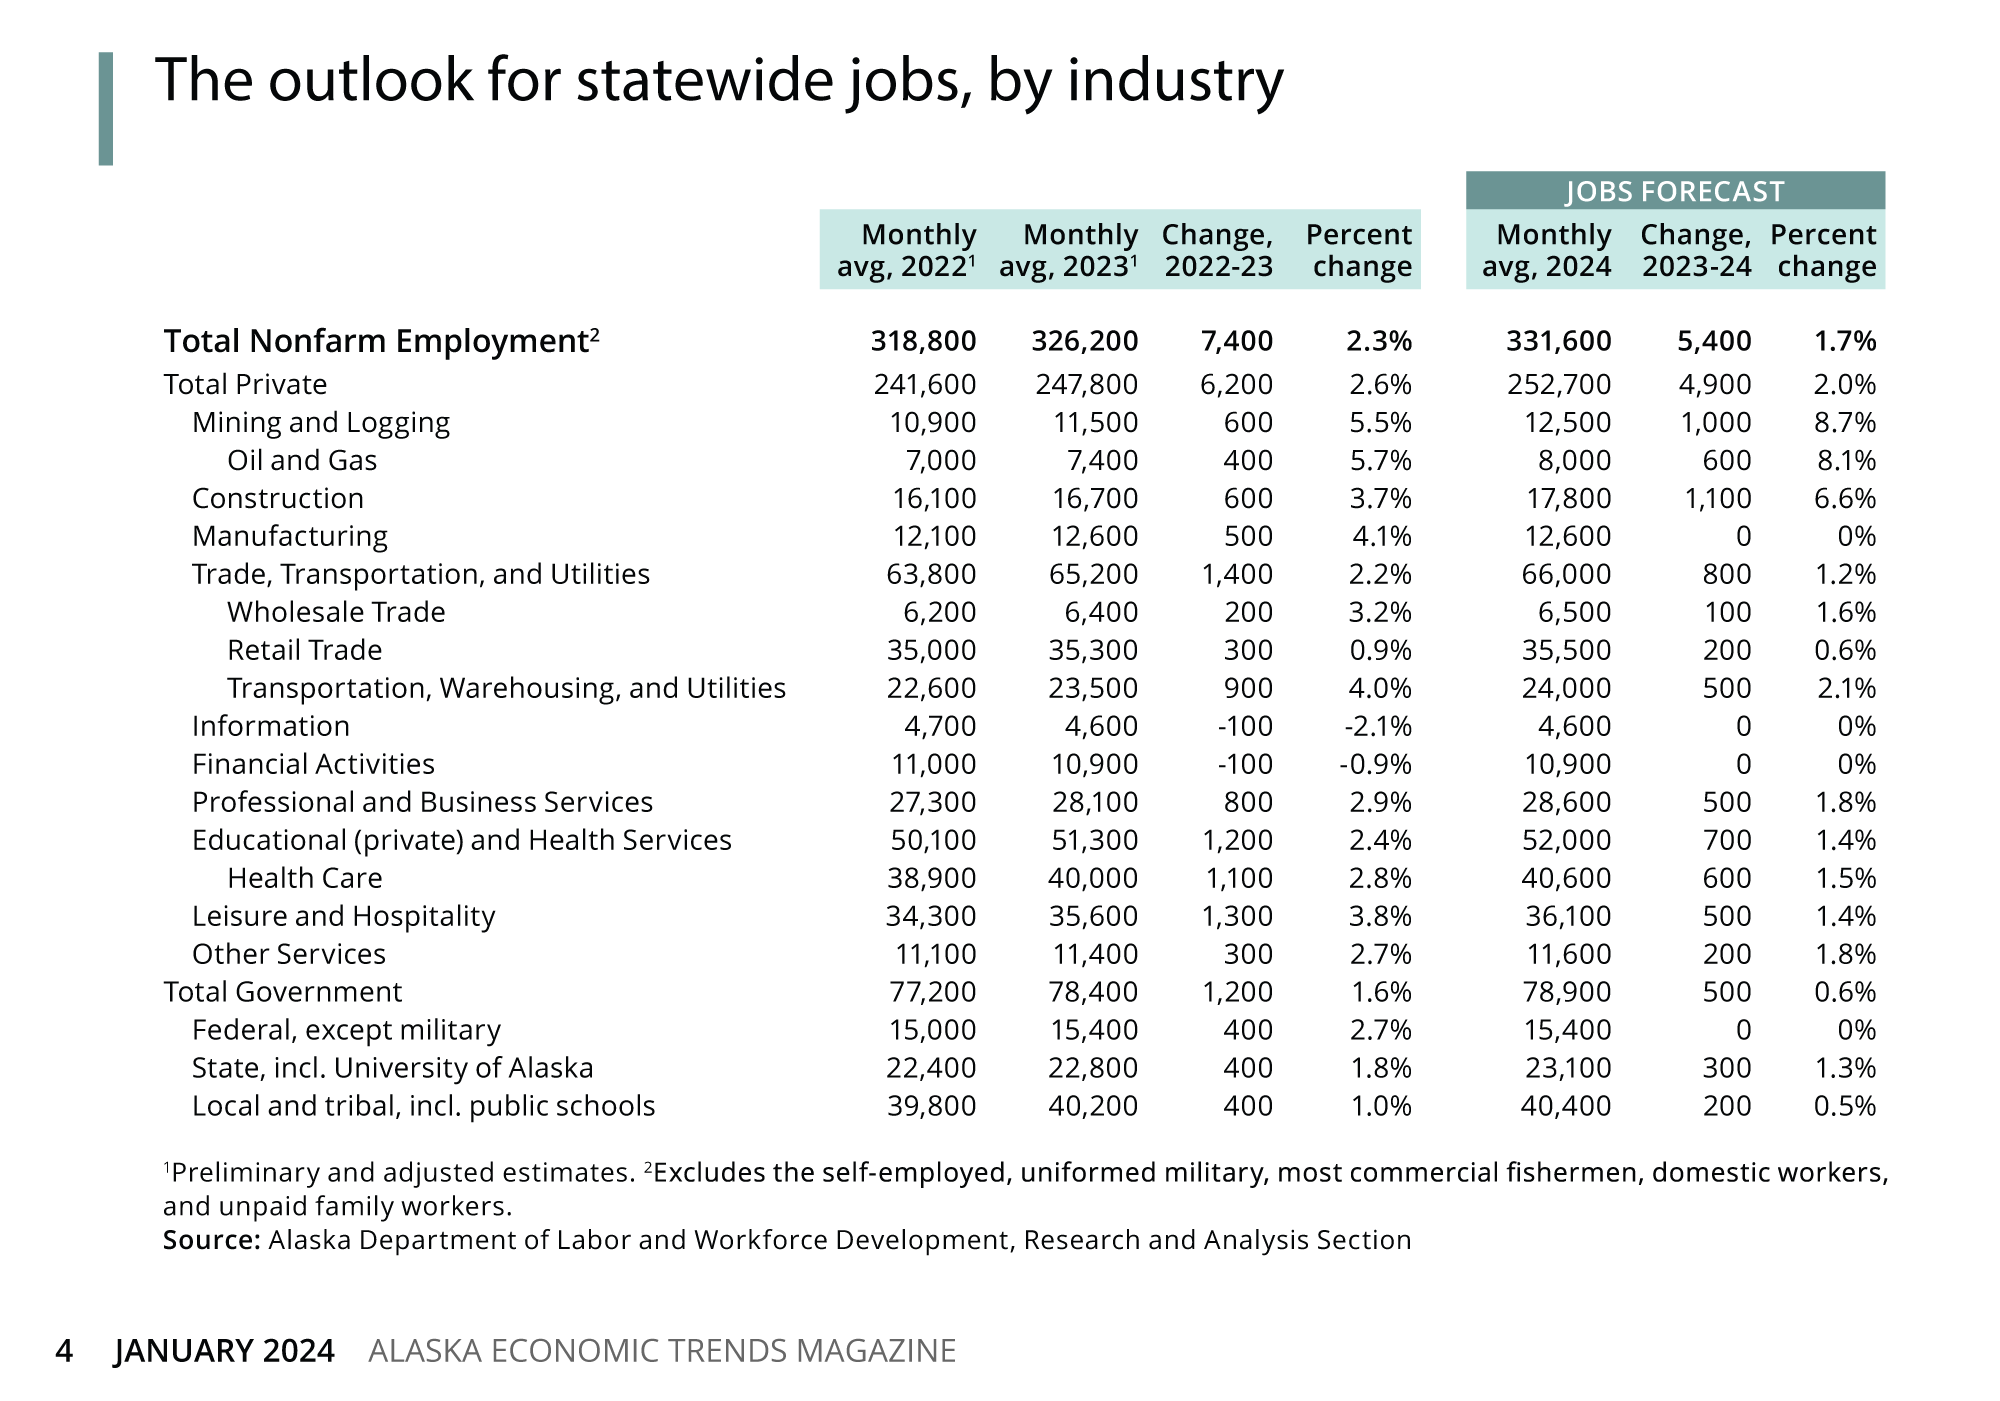 table showing outlook for Alaska statewide jobs by industry 